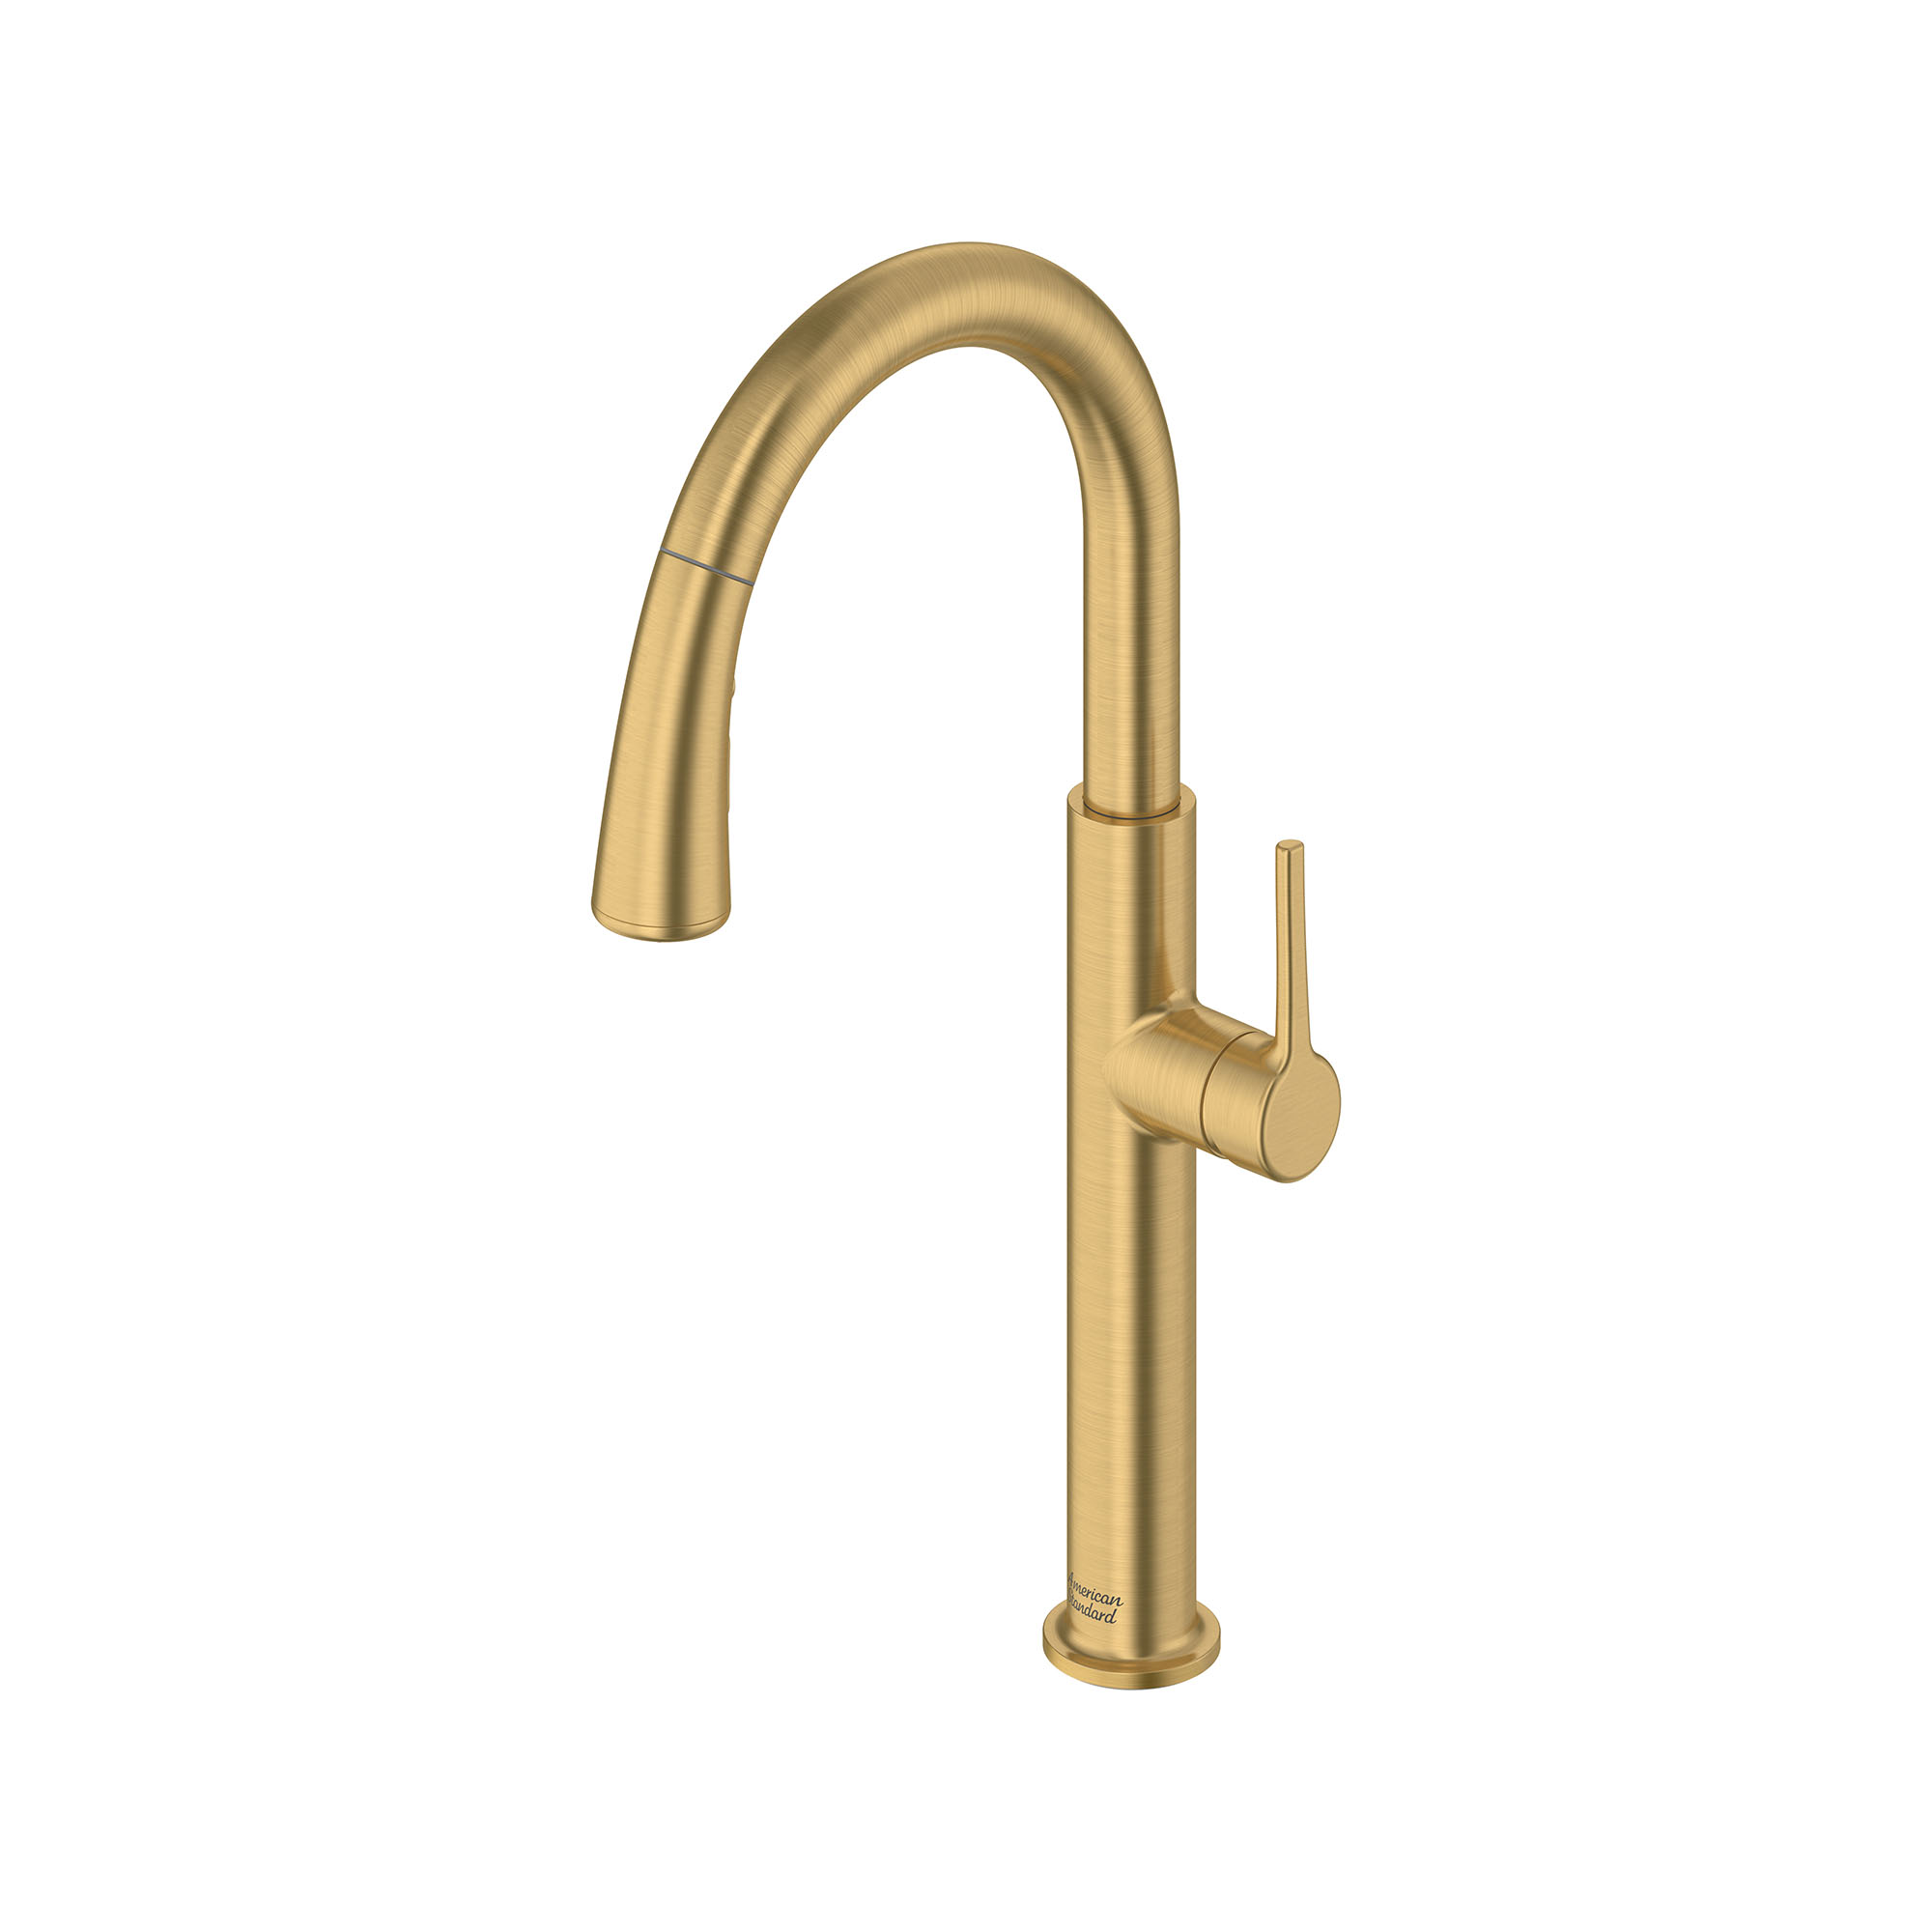 Cornet Gold Finish Kitchen Sink Faucet with Dual Spouts & Cover Plate -  Funitic